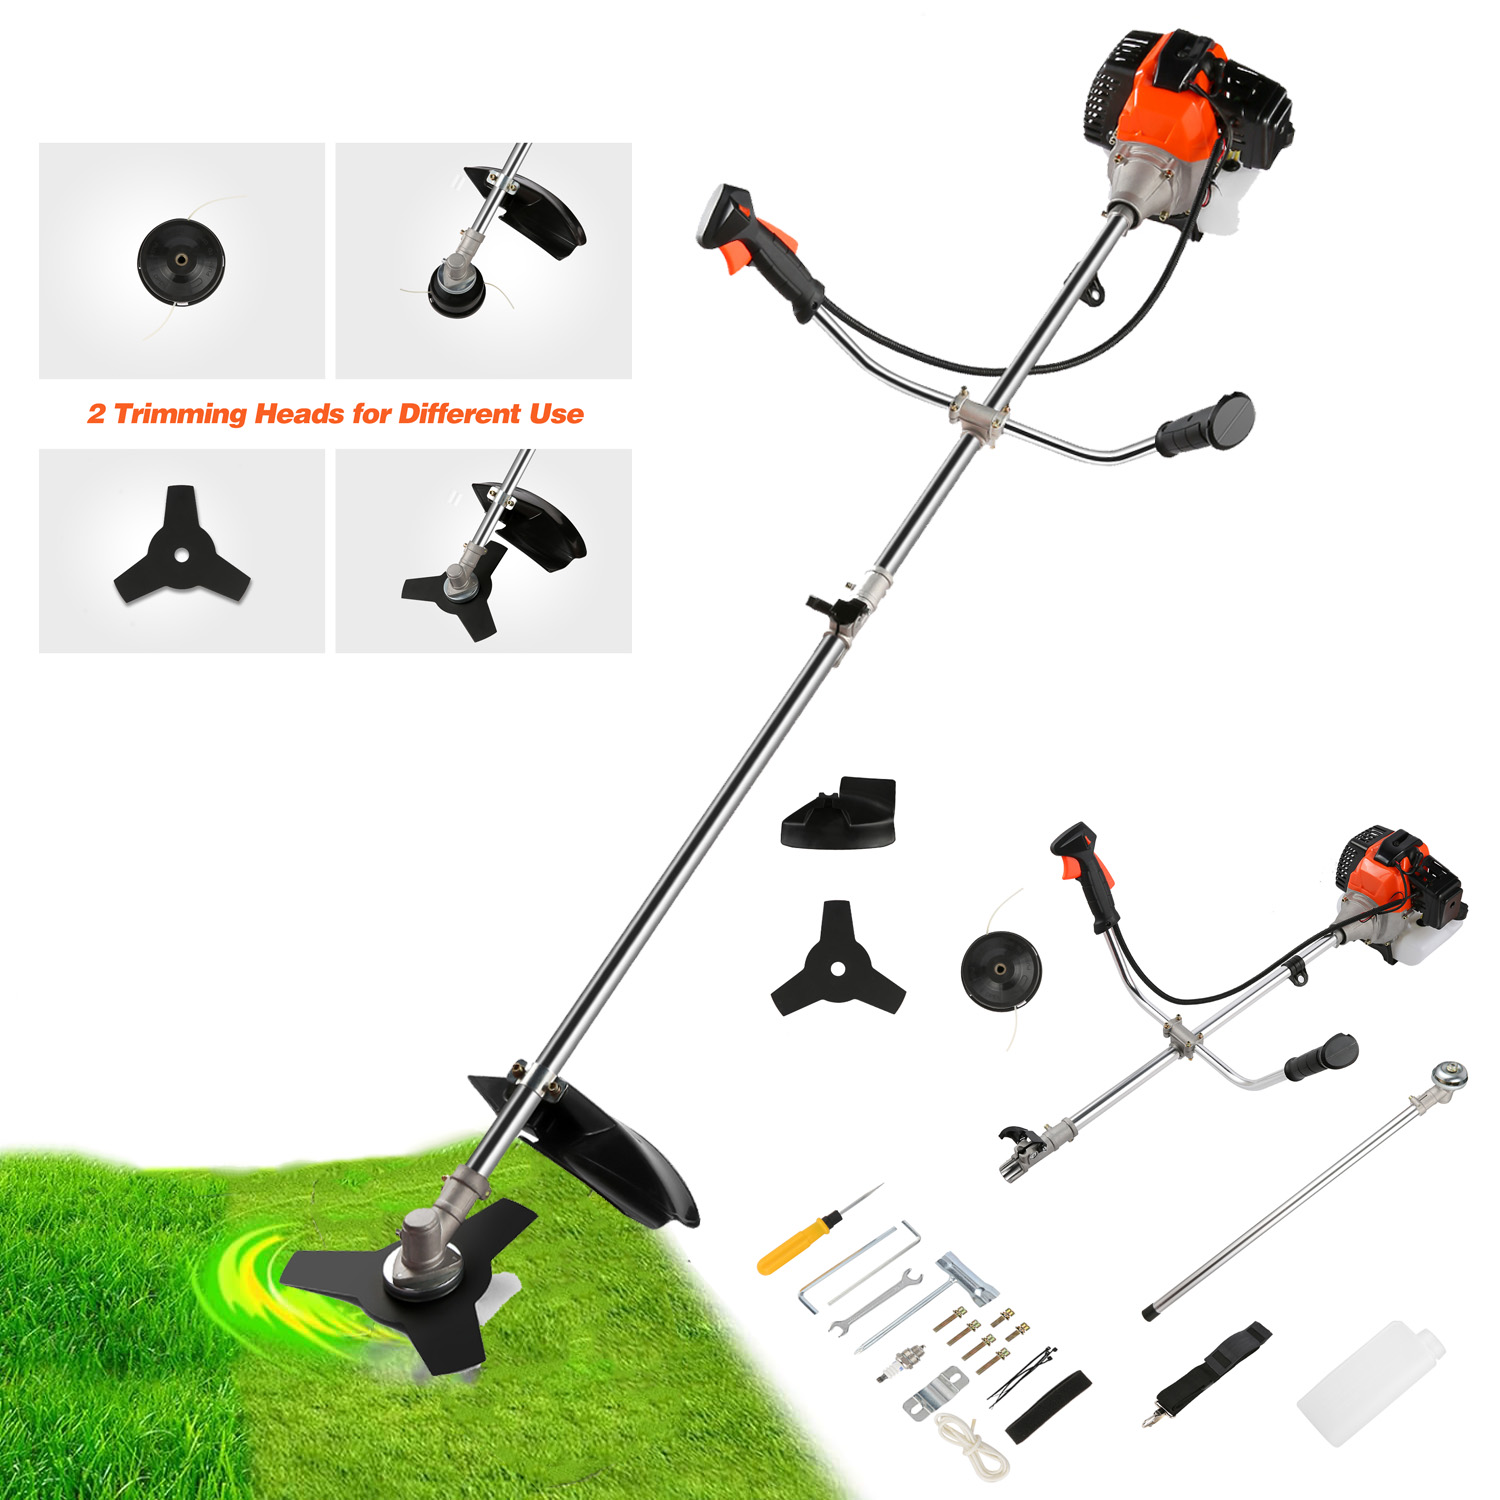 

42.7 Cc Gas String Trimmer, Straight Shaft Gasoline Powered Grass Cutter, 2-in-1 Gas Powered, With 2 Detachable Head, Outdoor Backyard Lawn Care